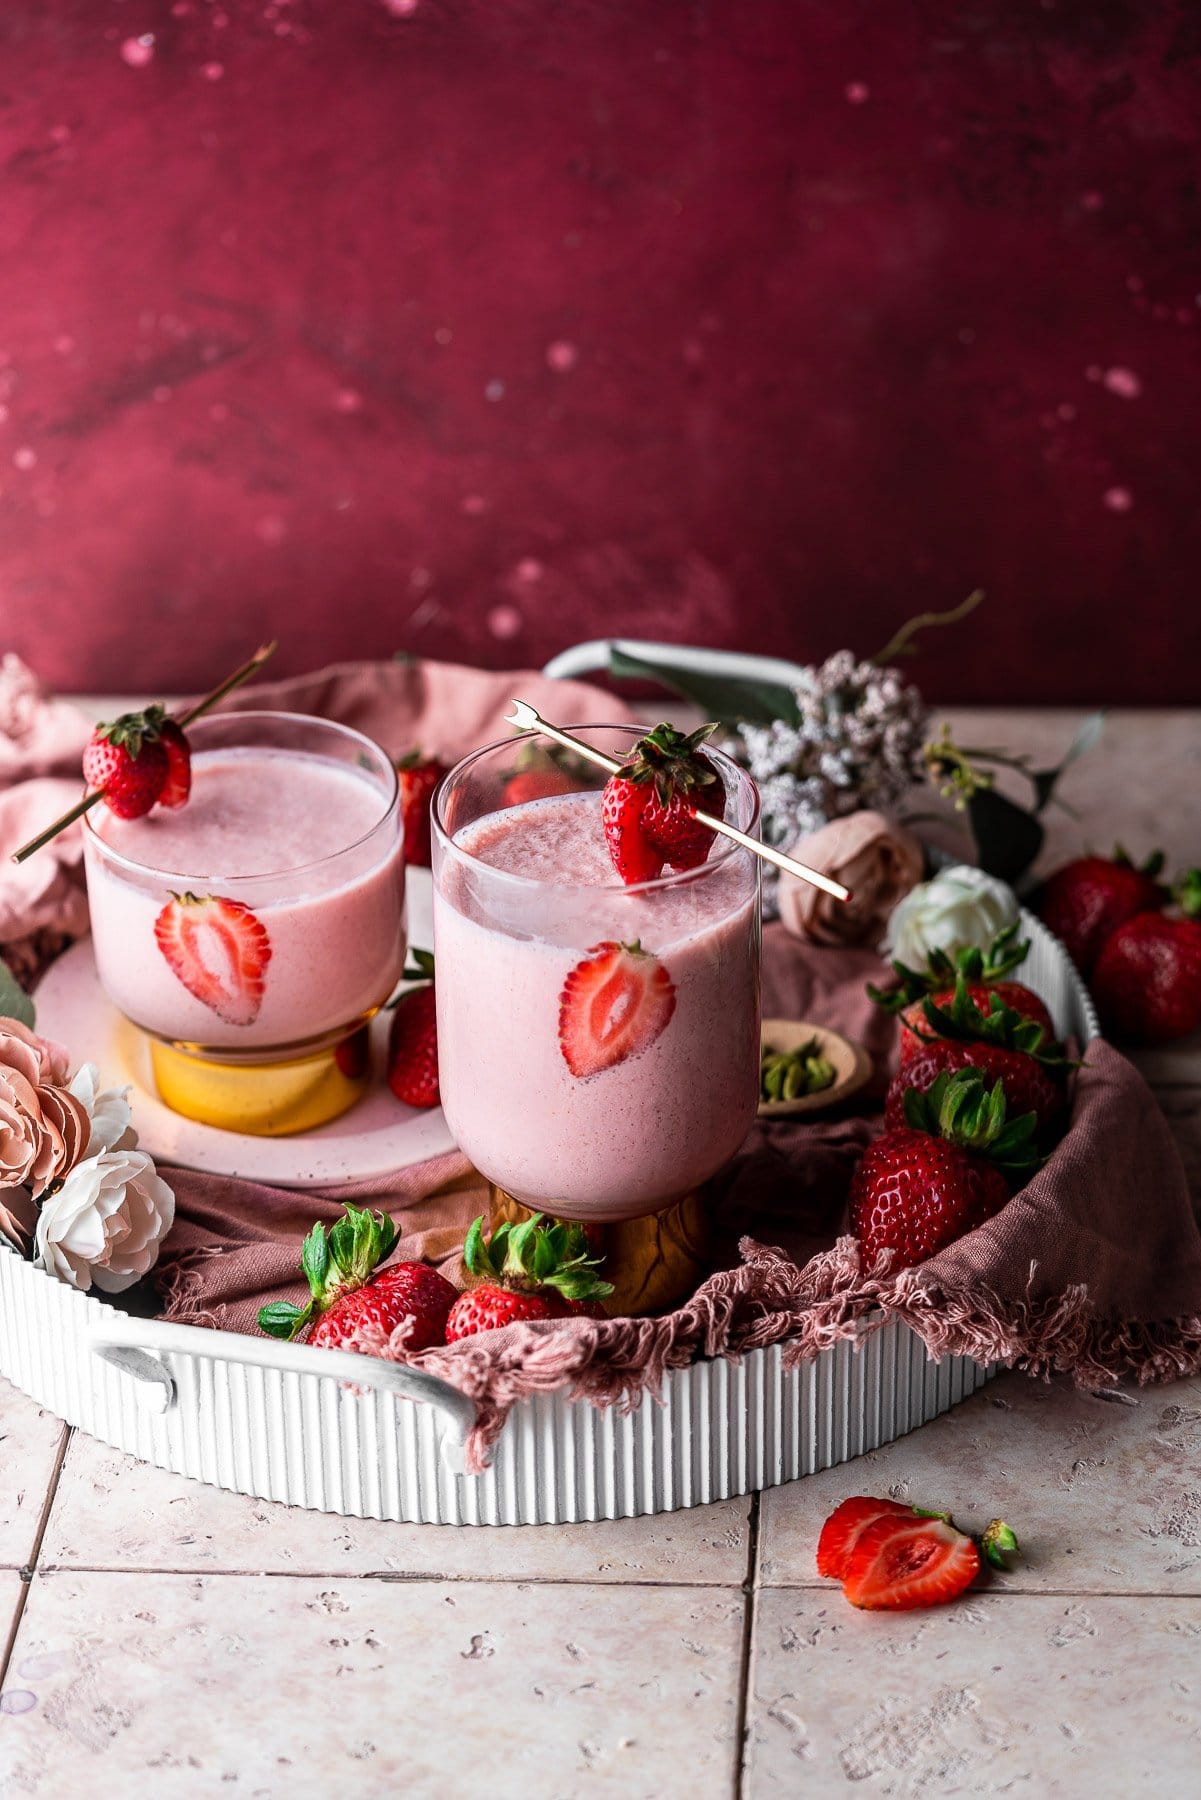 Two Strawberry Lassis in a tray decorated with fresh strawberries and flowers.